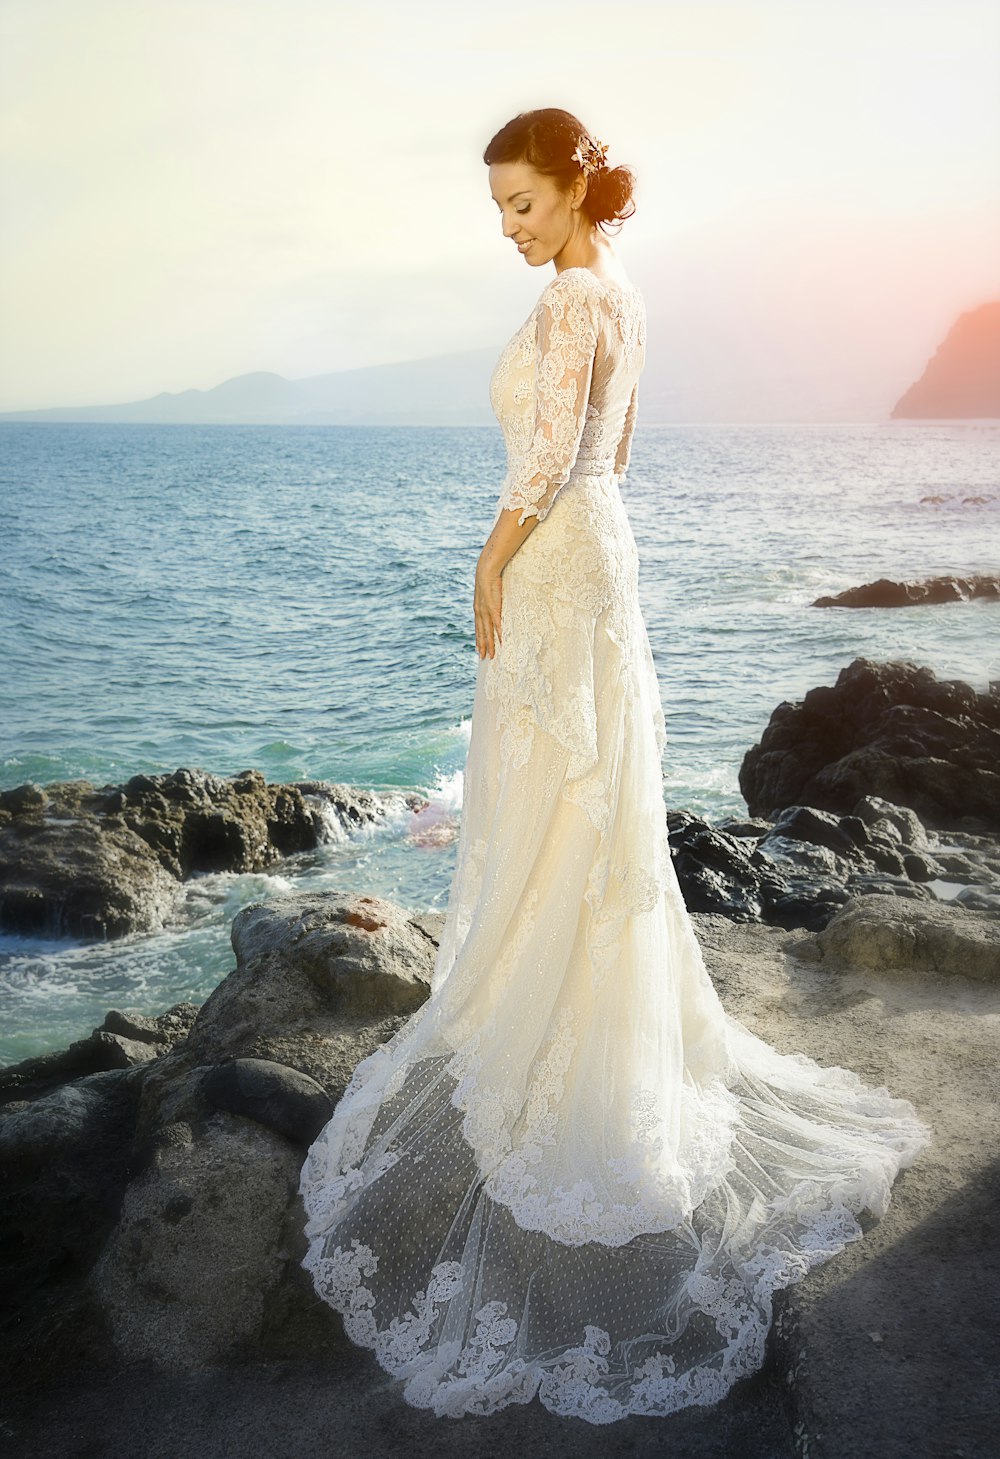 woman wearing white gown standing on rocks across body of water